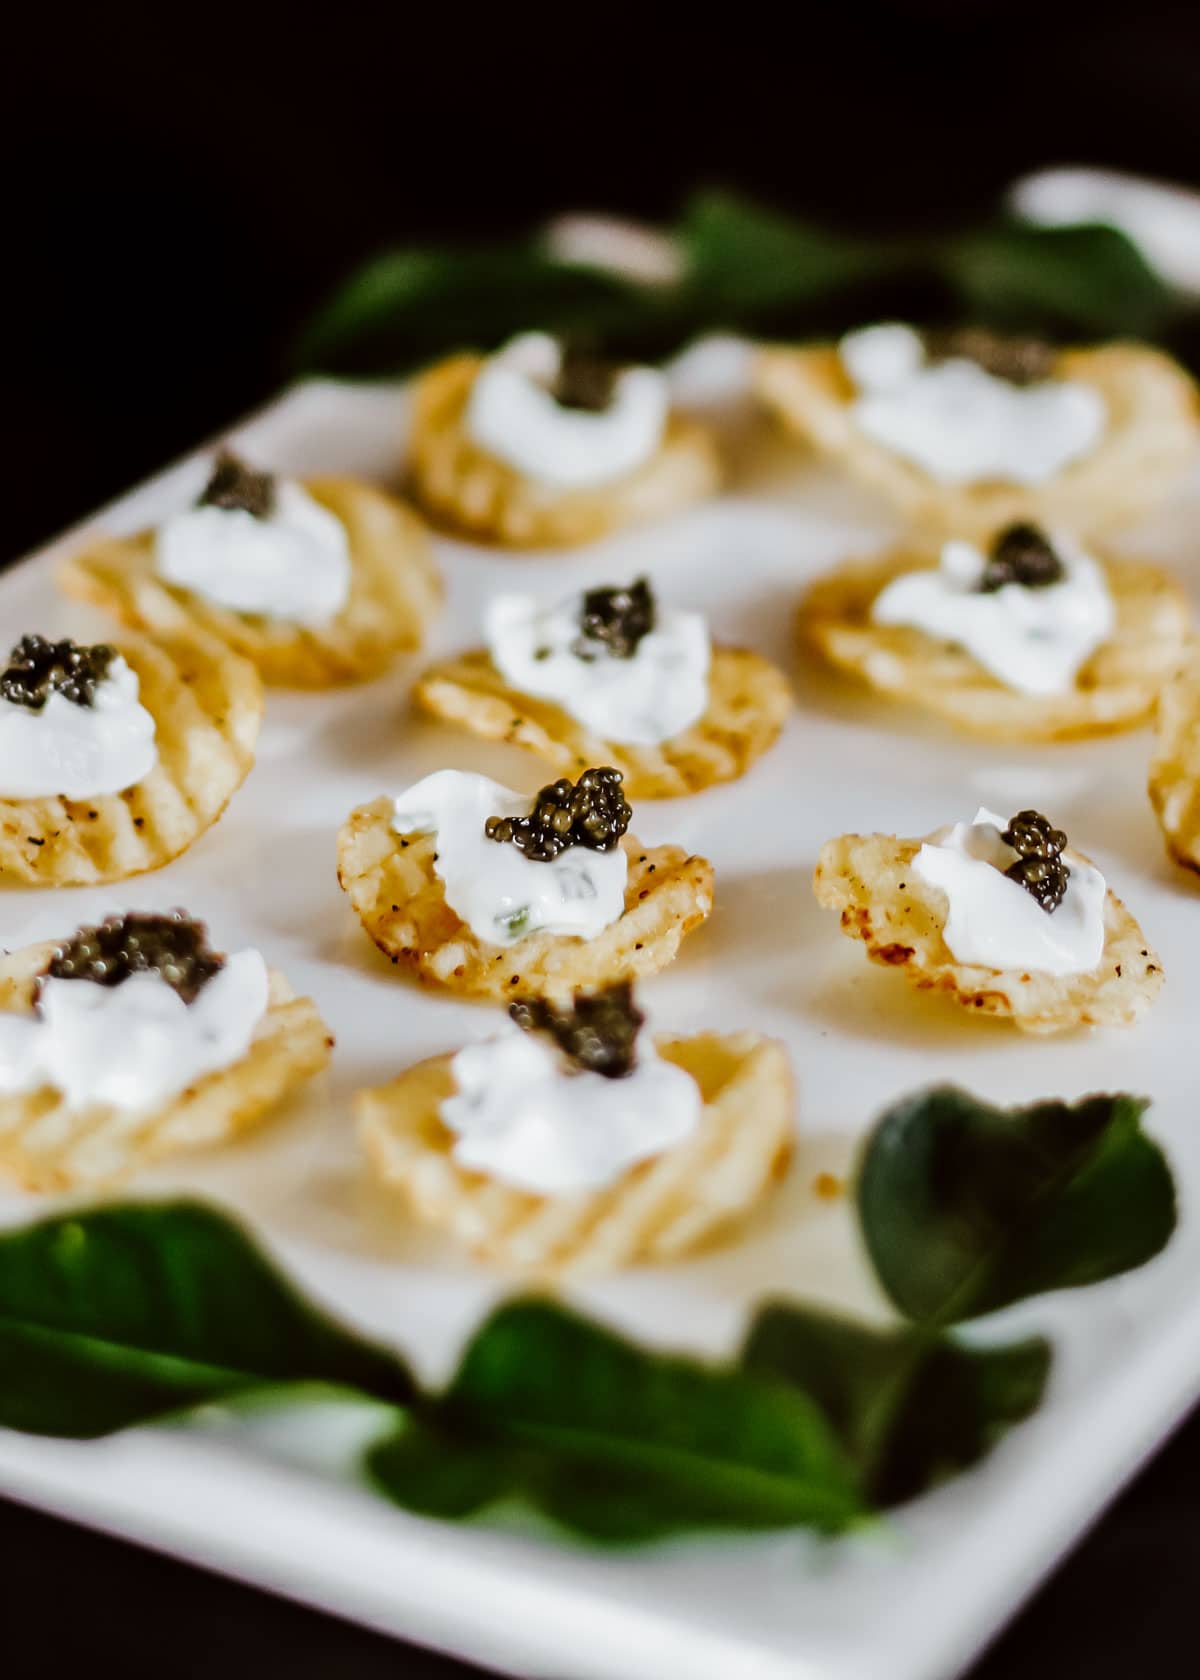 ruffled potato chips with sour cream and caviar on top, on white tray.